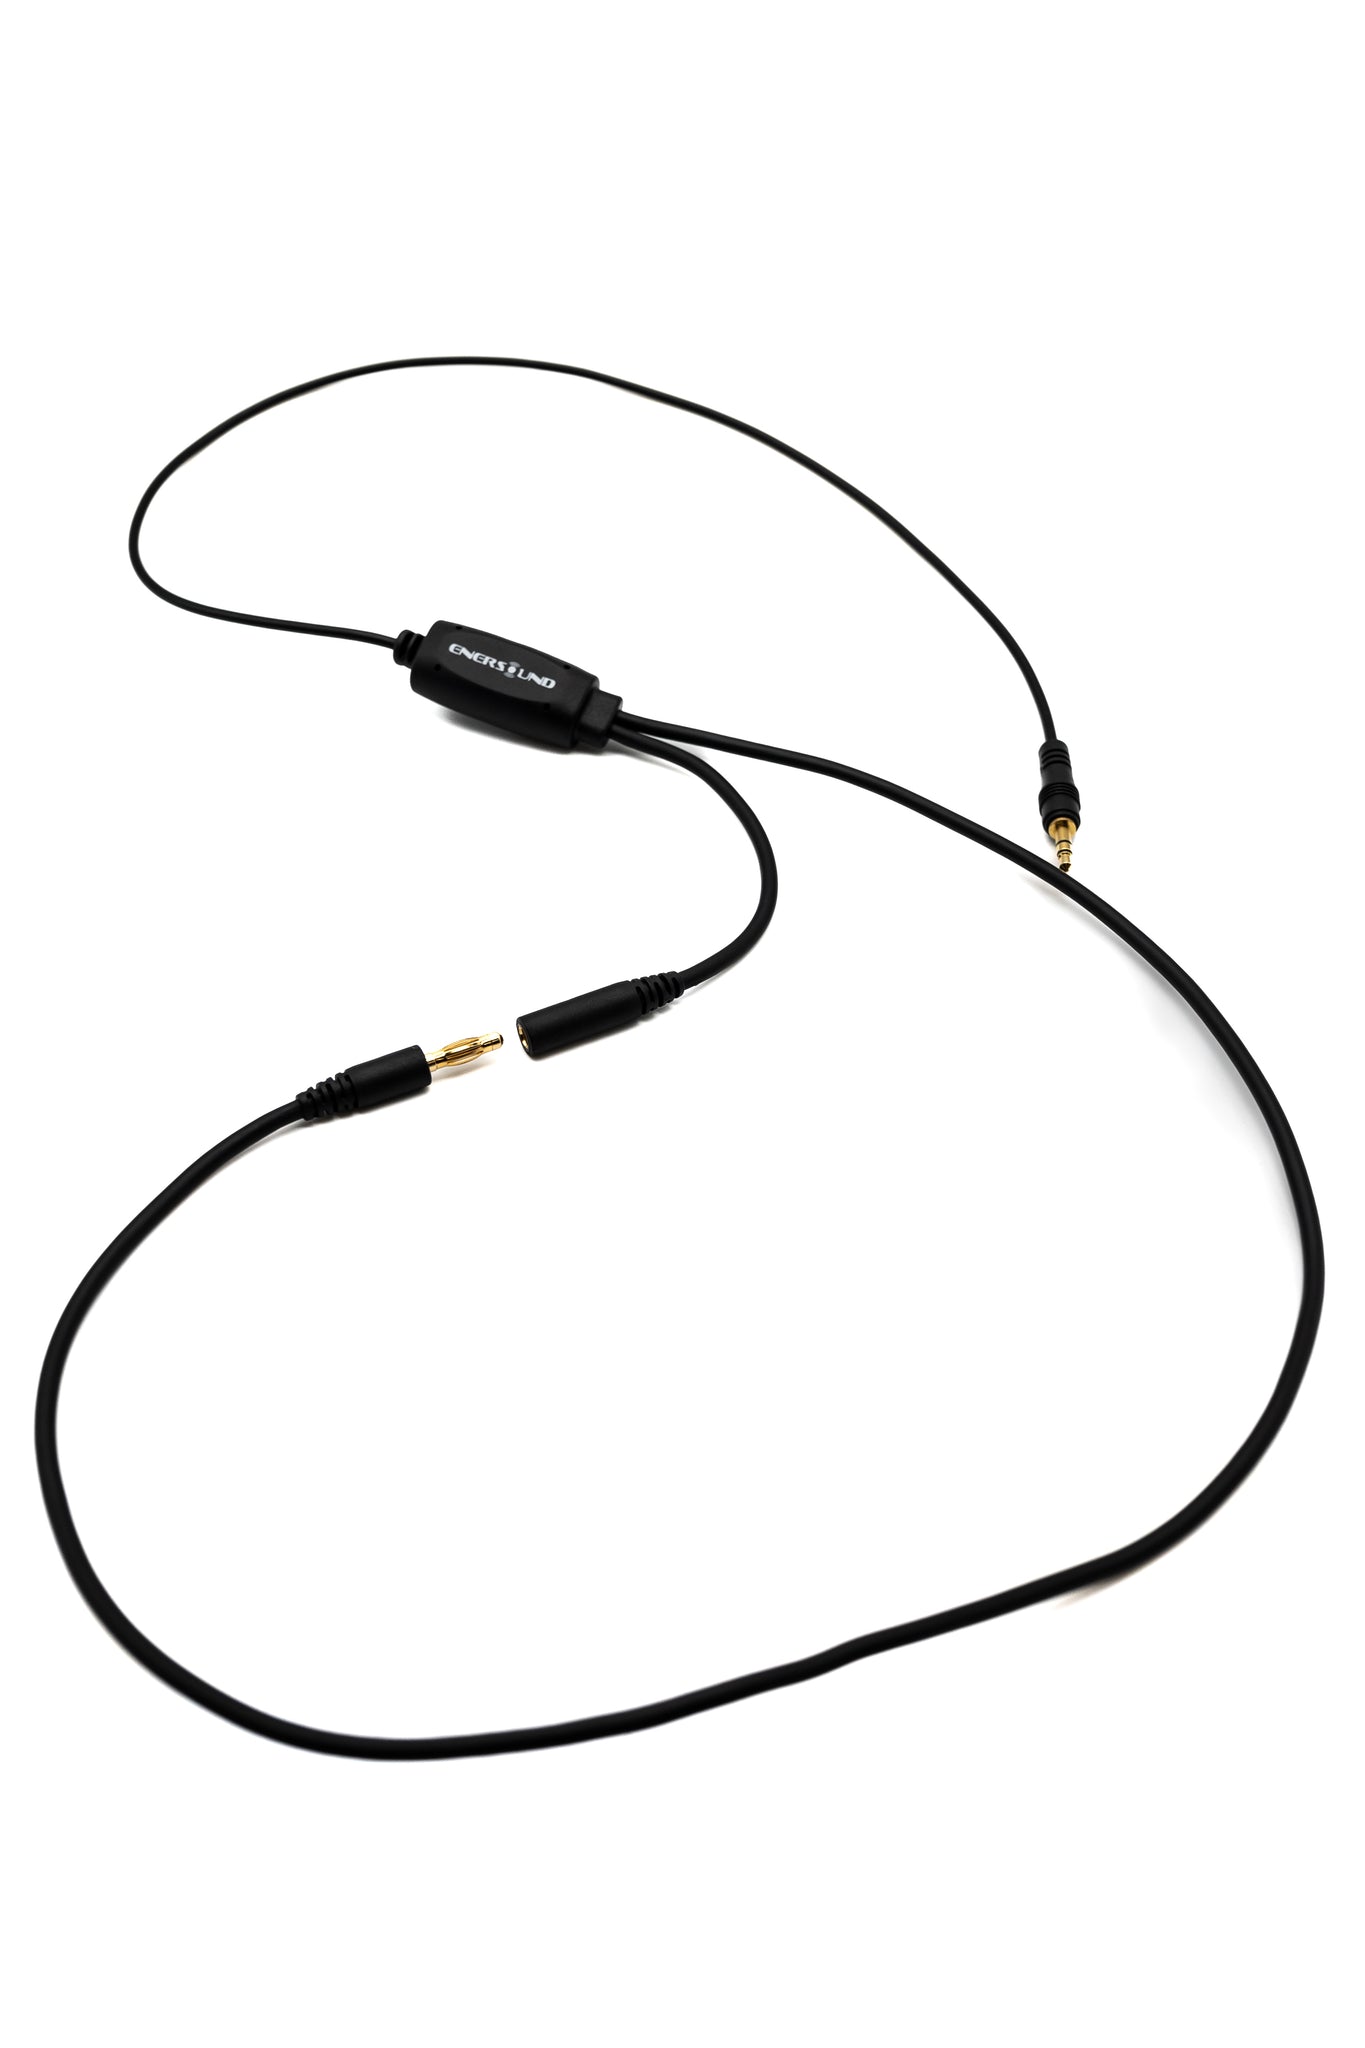 NKL-401 Professional Neckloop with Break Away safety feature 3.5mm Mono plug